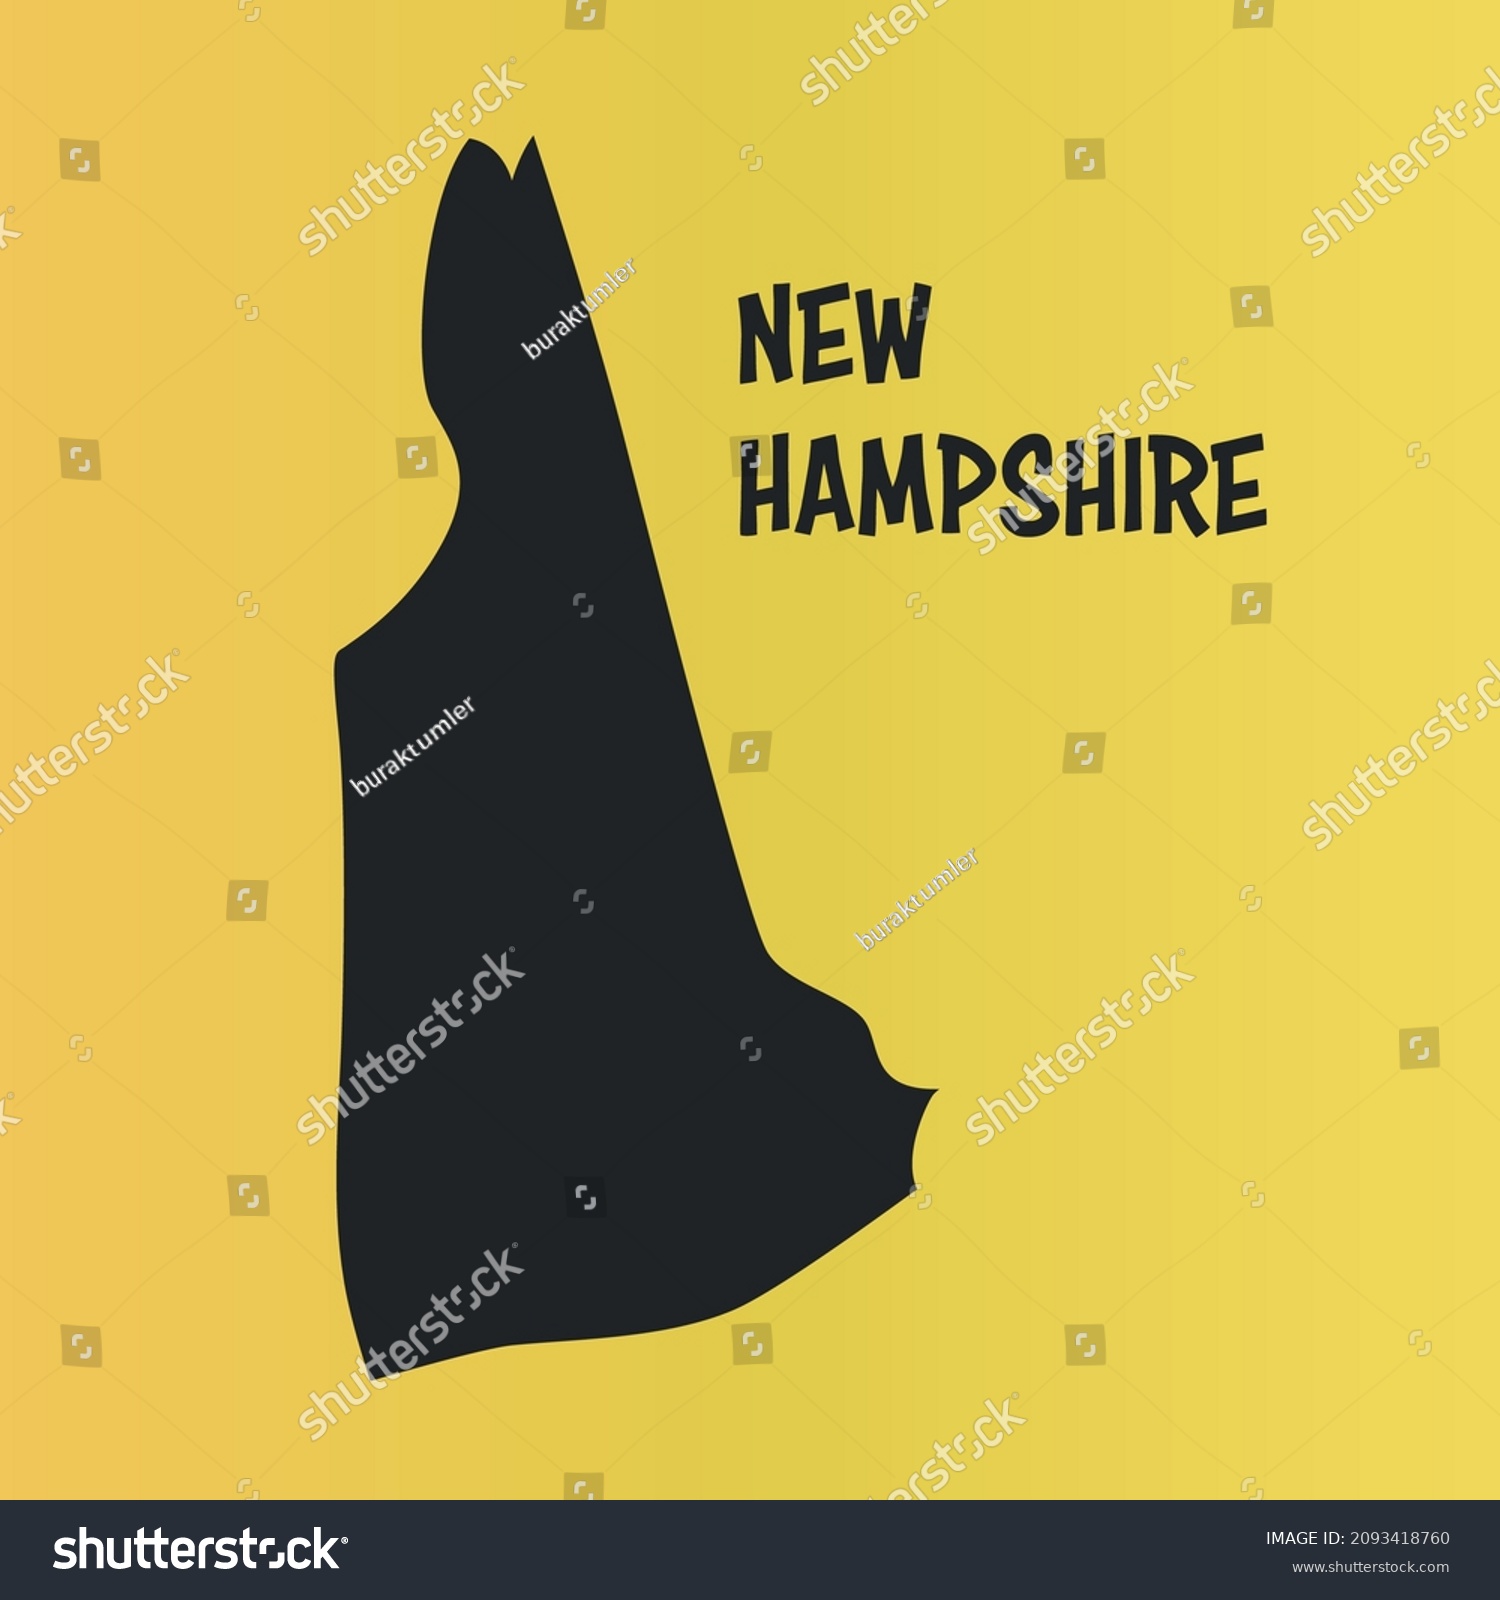 SVG of New Hampshire Vector Map. Editable high quality illustration of the American state of New Hampshire state border map svg